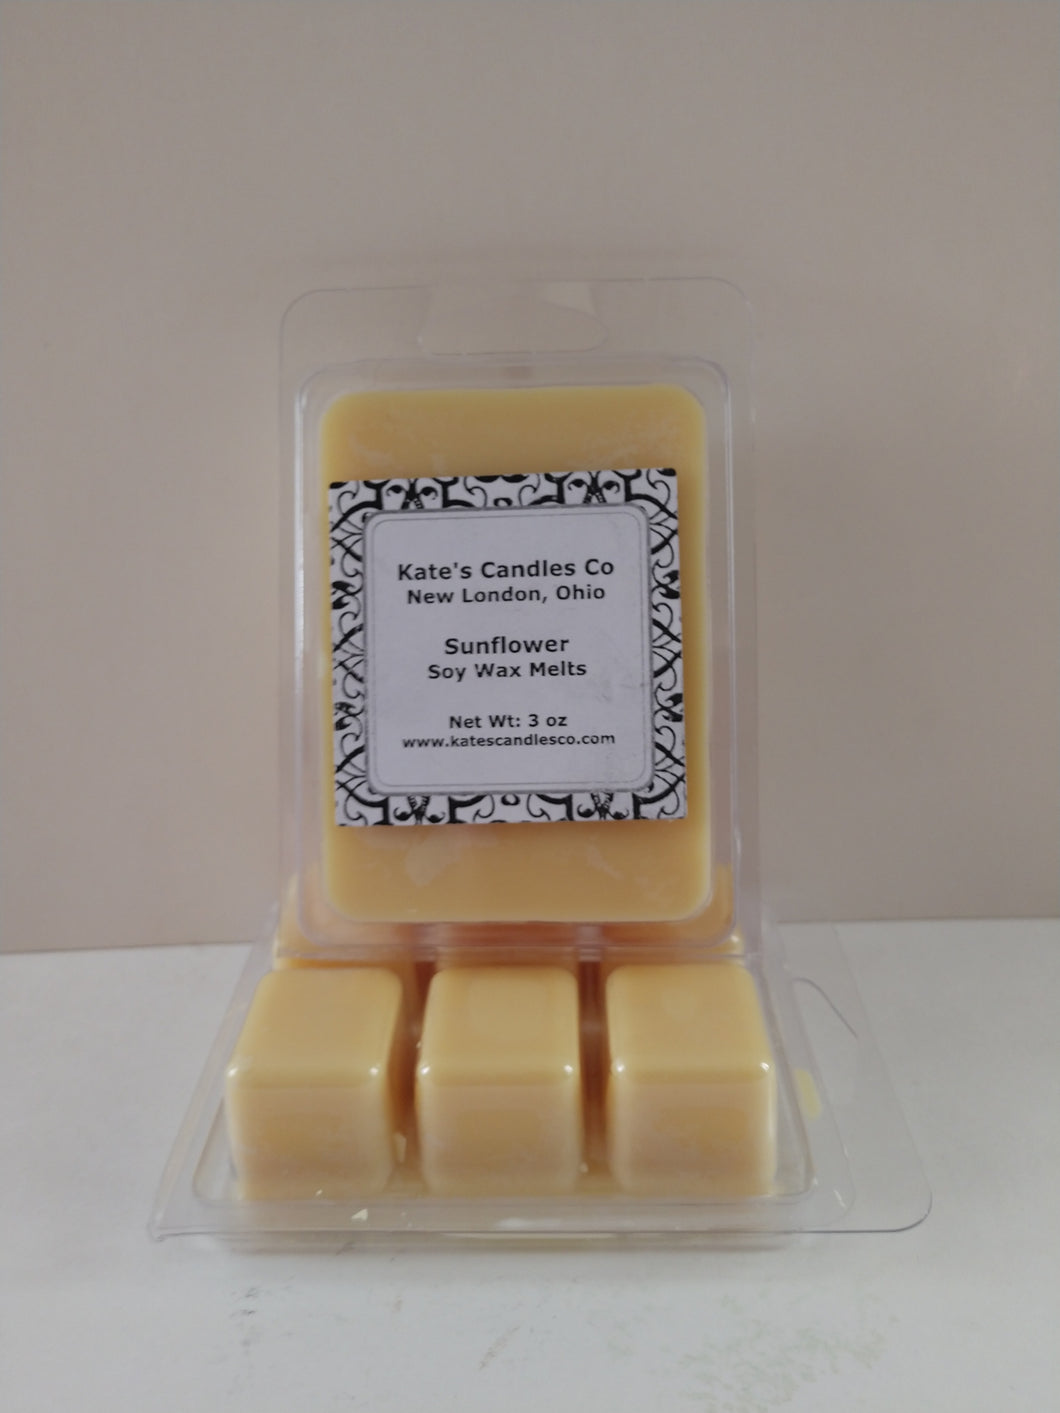 Sunflower Soy Wax Melts - Kate's Candles Co. Soy Candles